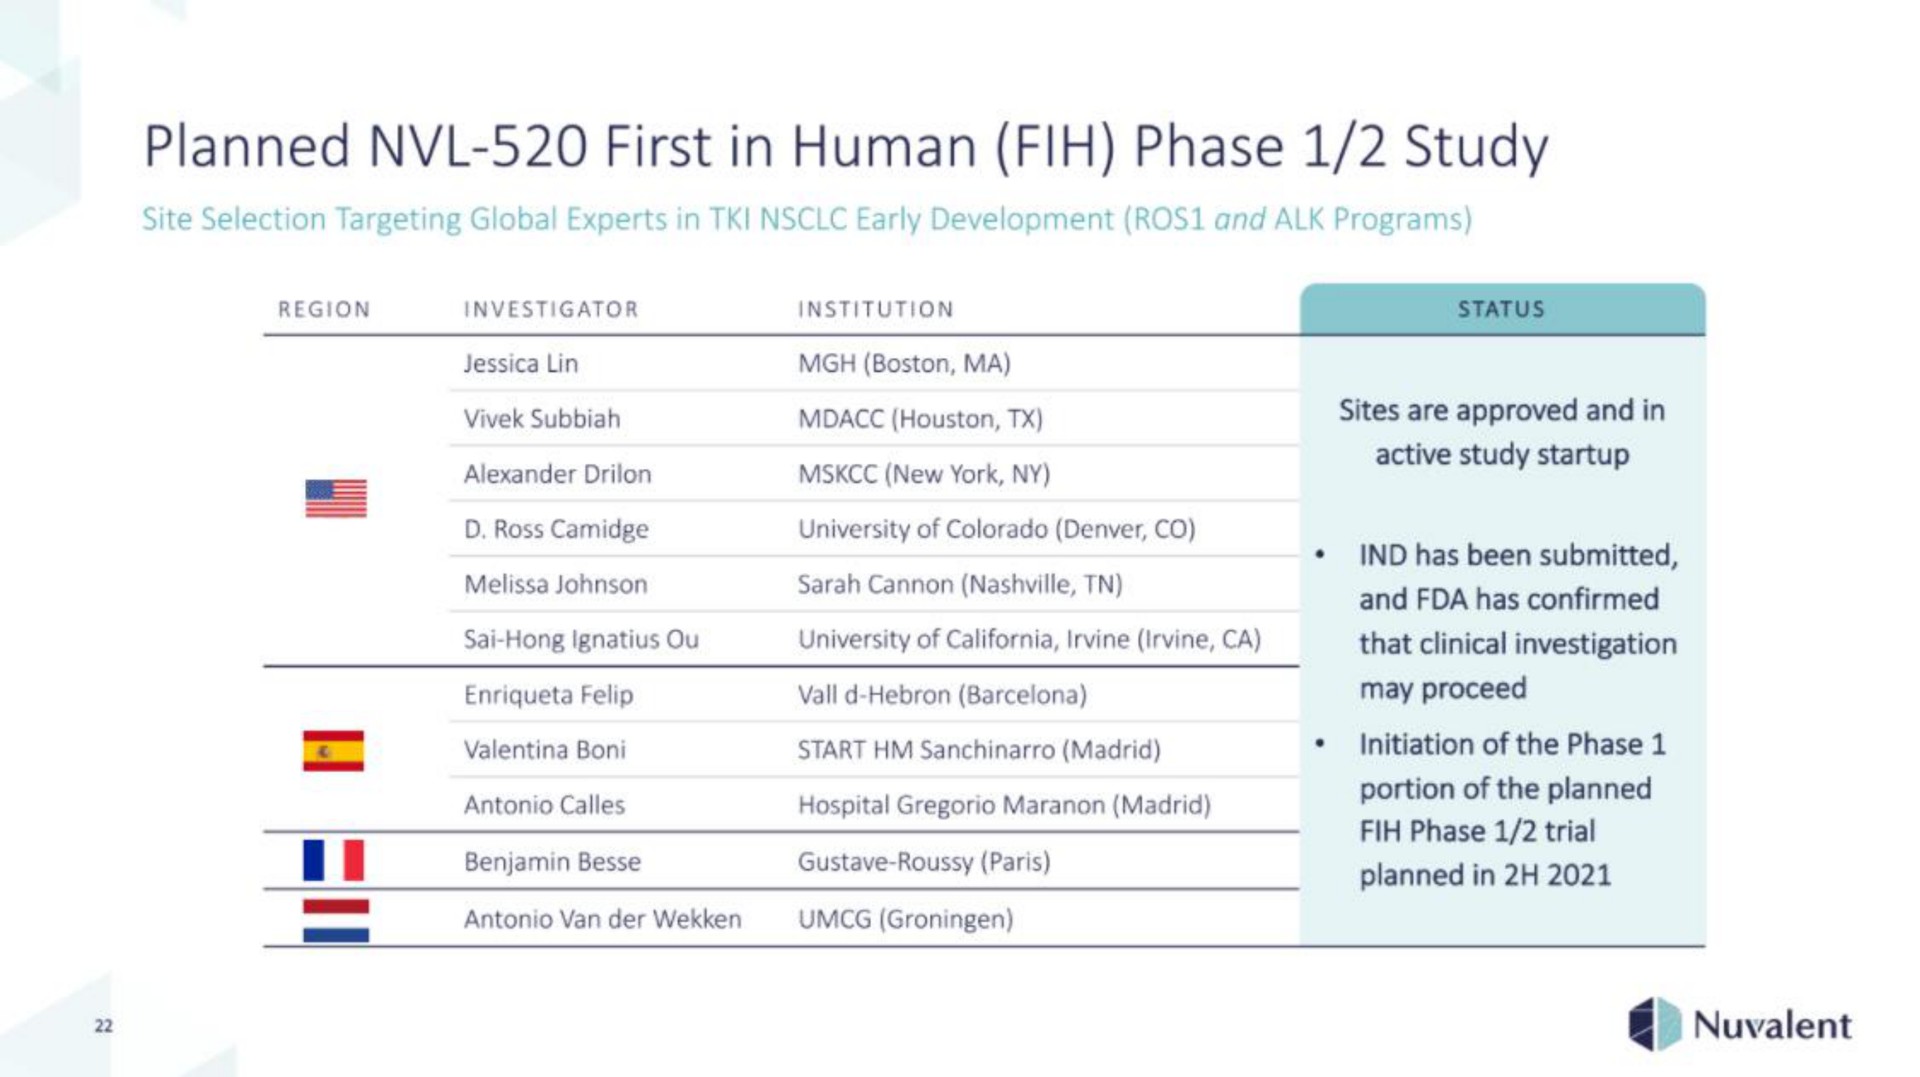 planned first in human phase study | Nuvalent